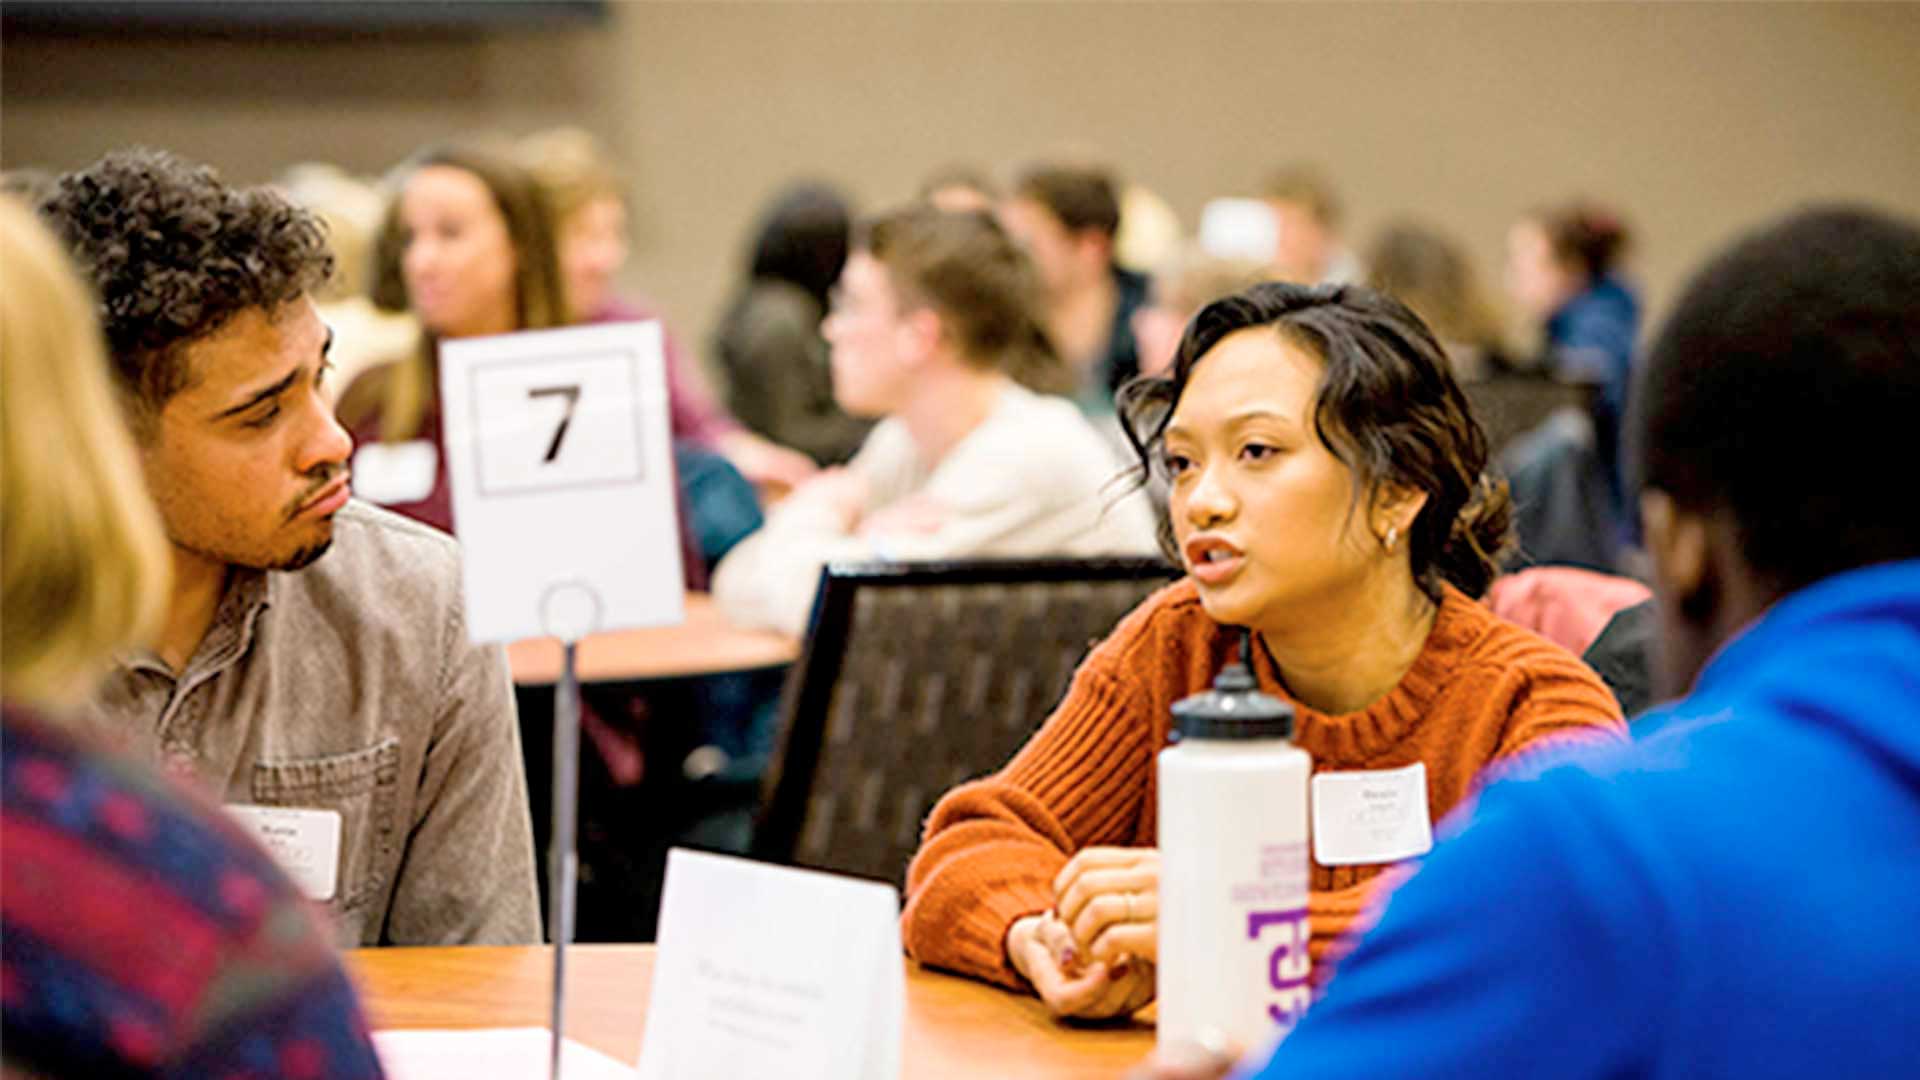 Students converse at a table during a conference.